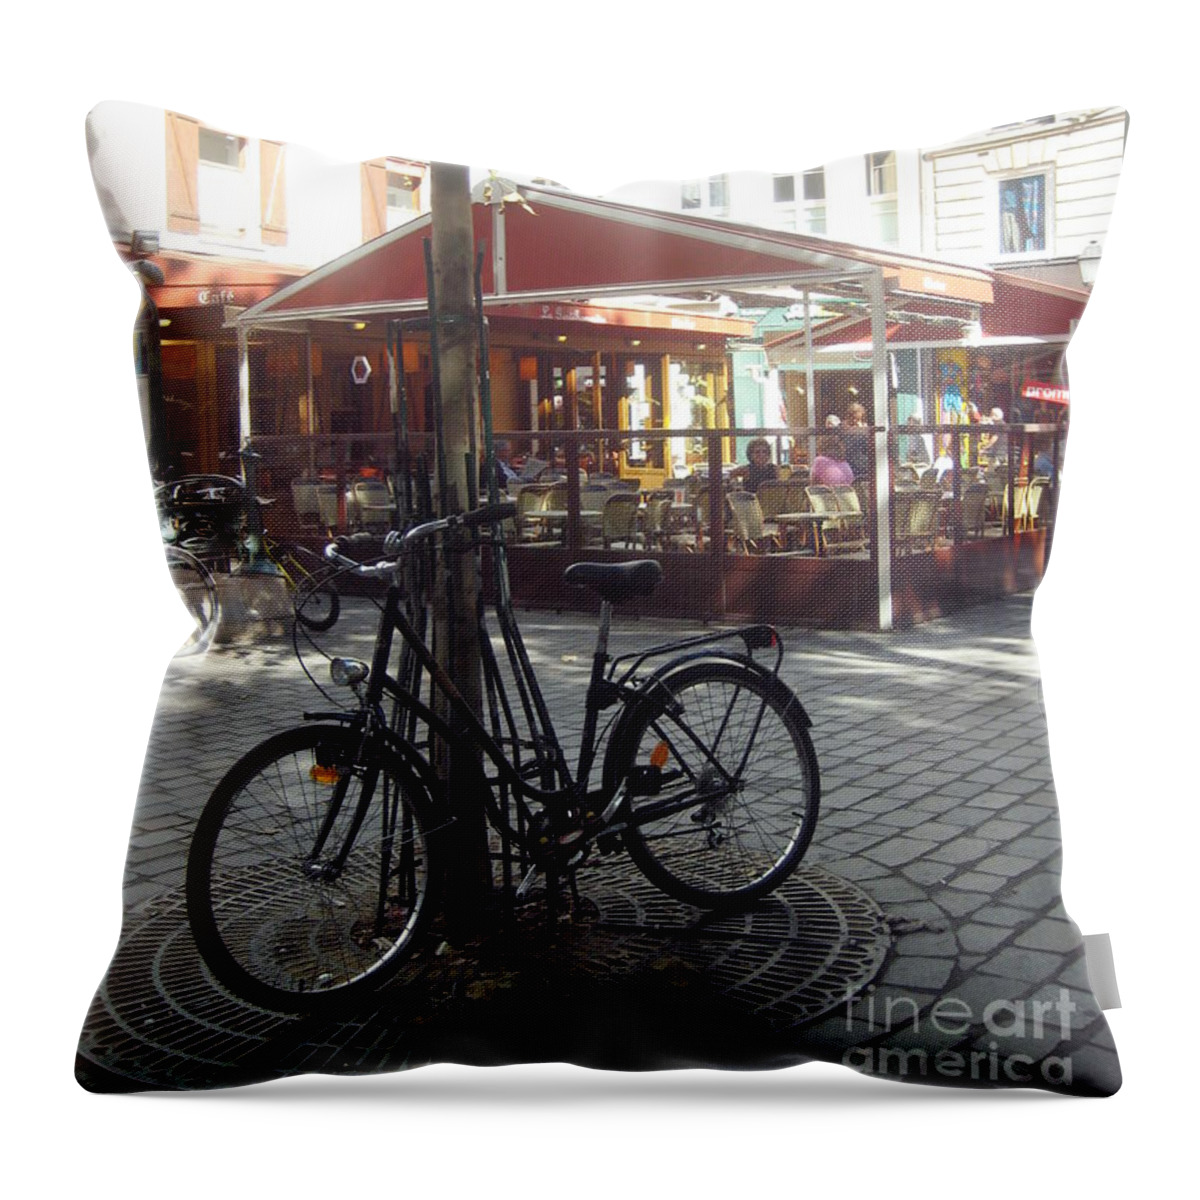 Parisian Style Bicycle At The Cafe By Europe Travel Gallery Throw Pillow featuring the photograph Parisian Bicycle At The Cafe by Europe Travel Gallery